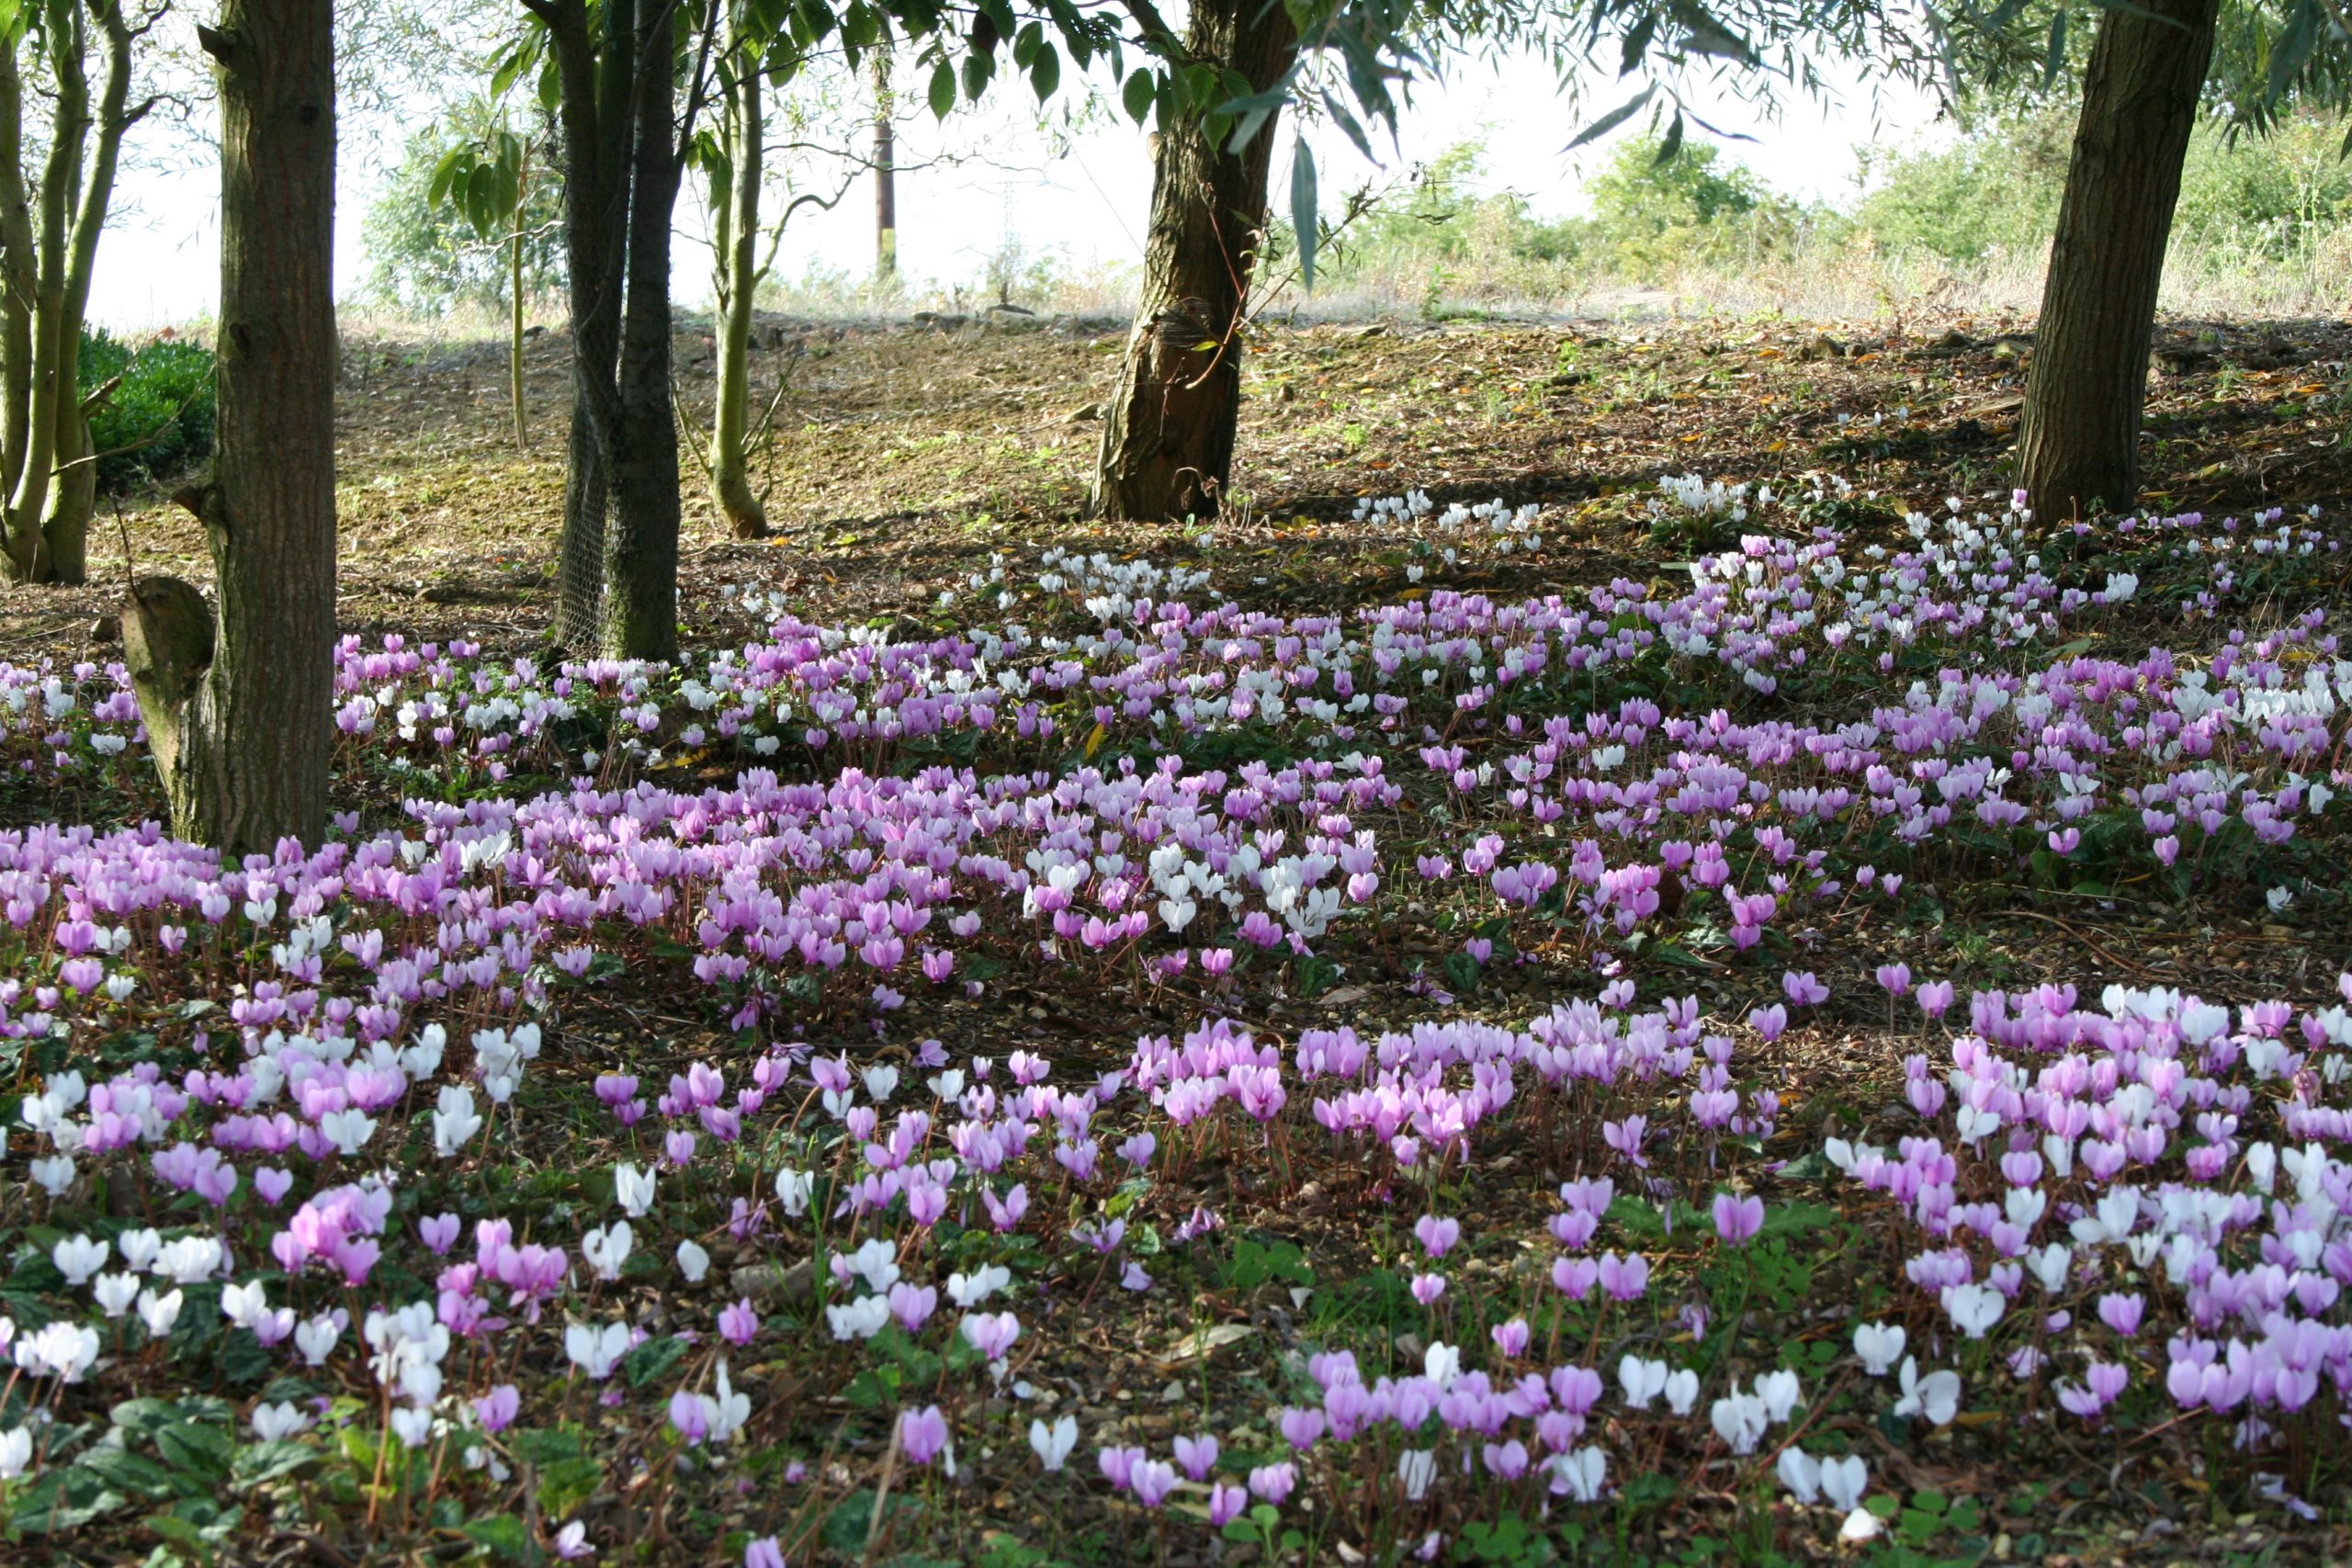 Cyclamen Hederifolium growing at Willows Nursery. Buy